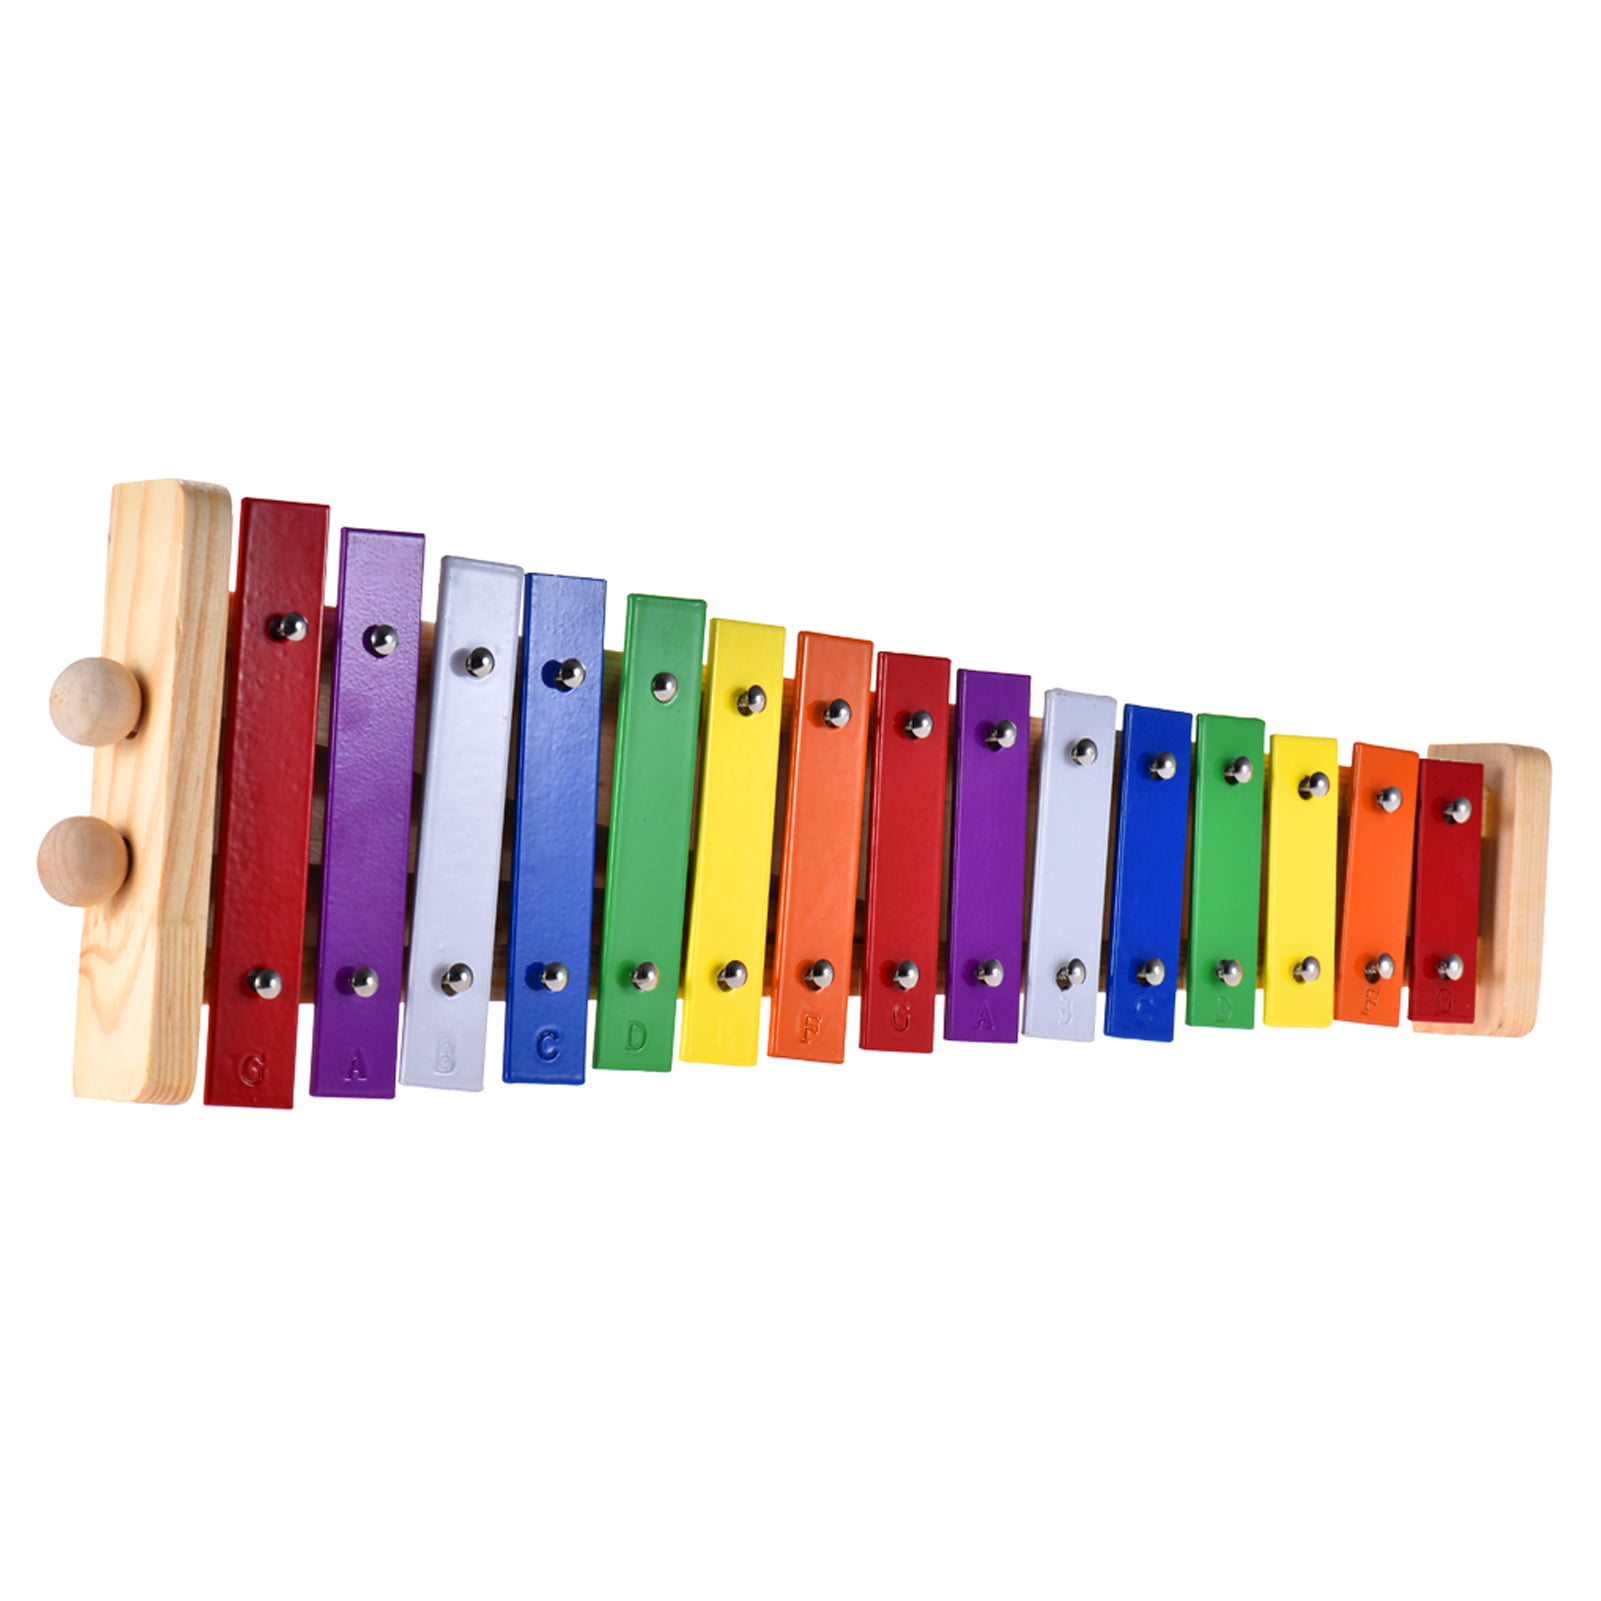 Kids Xylophone Wooden Musical Toy for Kids Ages 3 and up Glockenspiel 